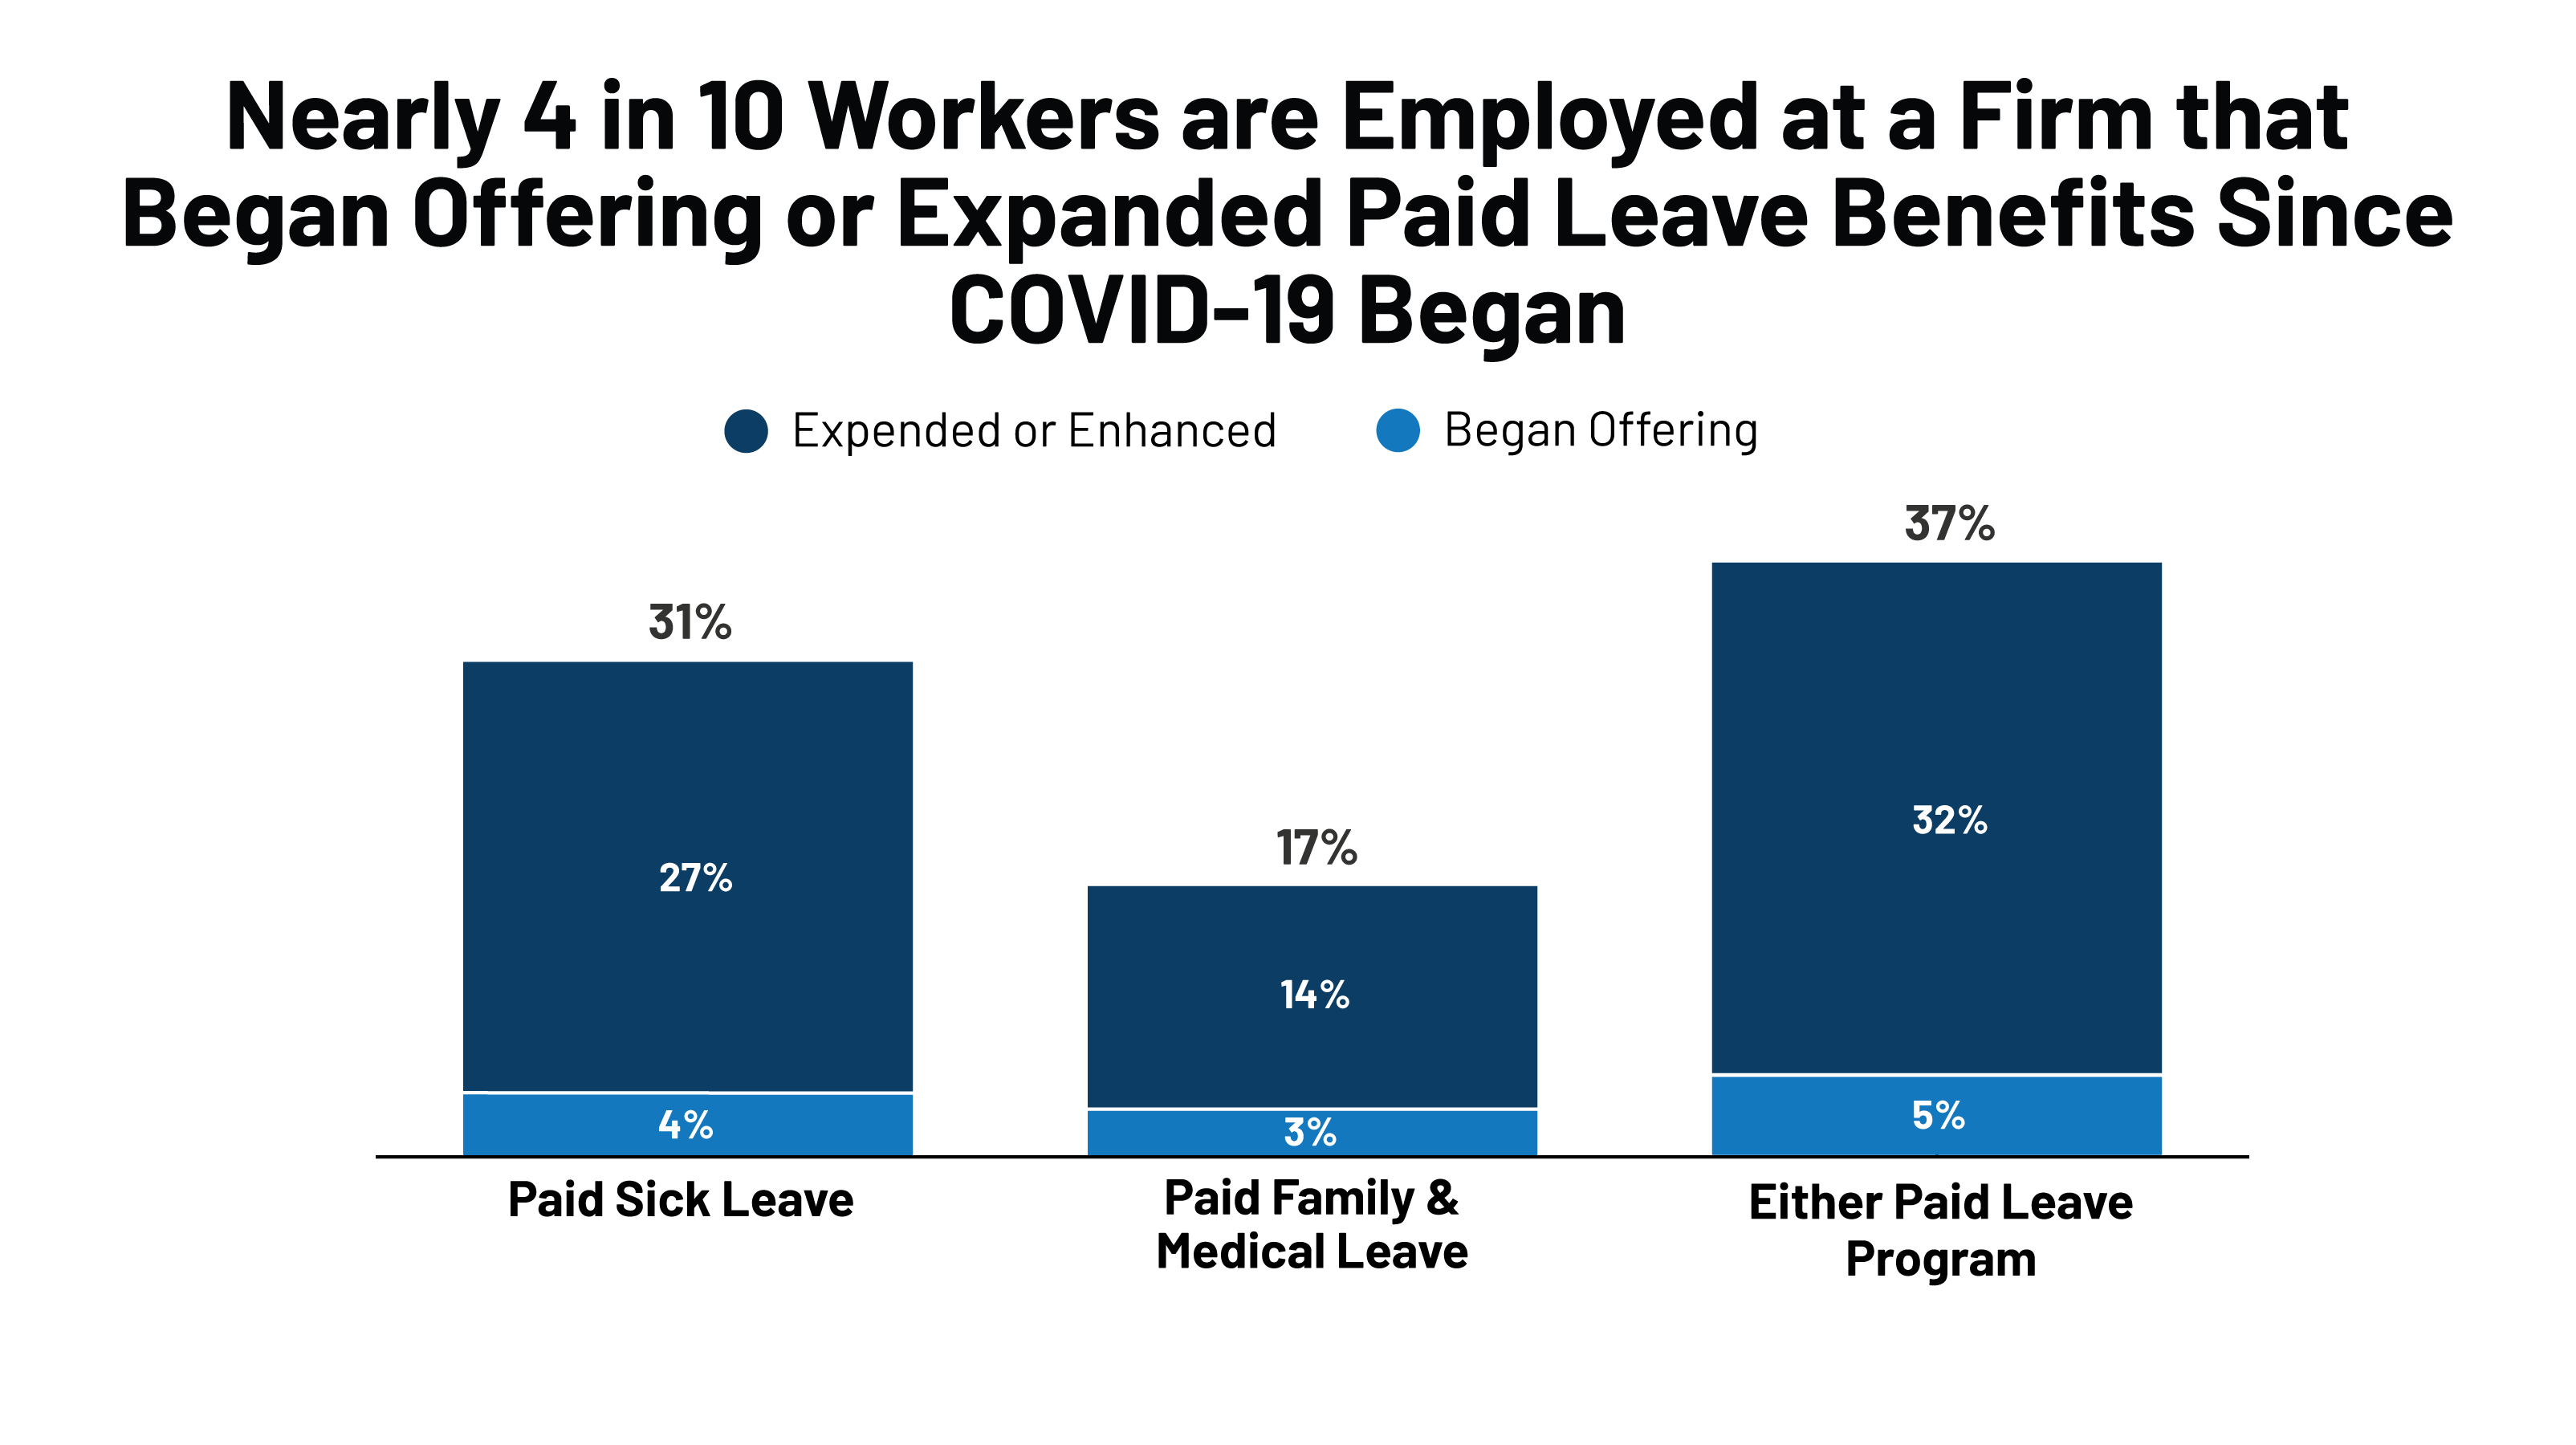 Employers Strengthen Paid Leave Benefits During the COVID19 Pandemic